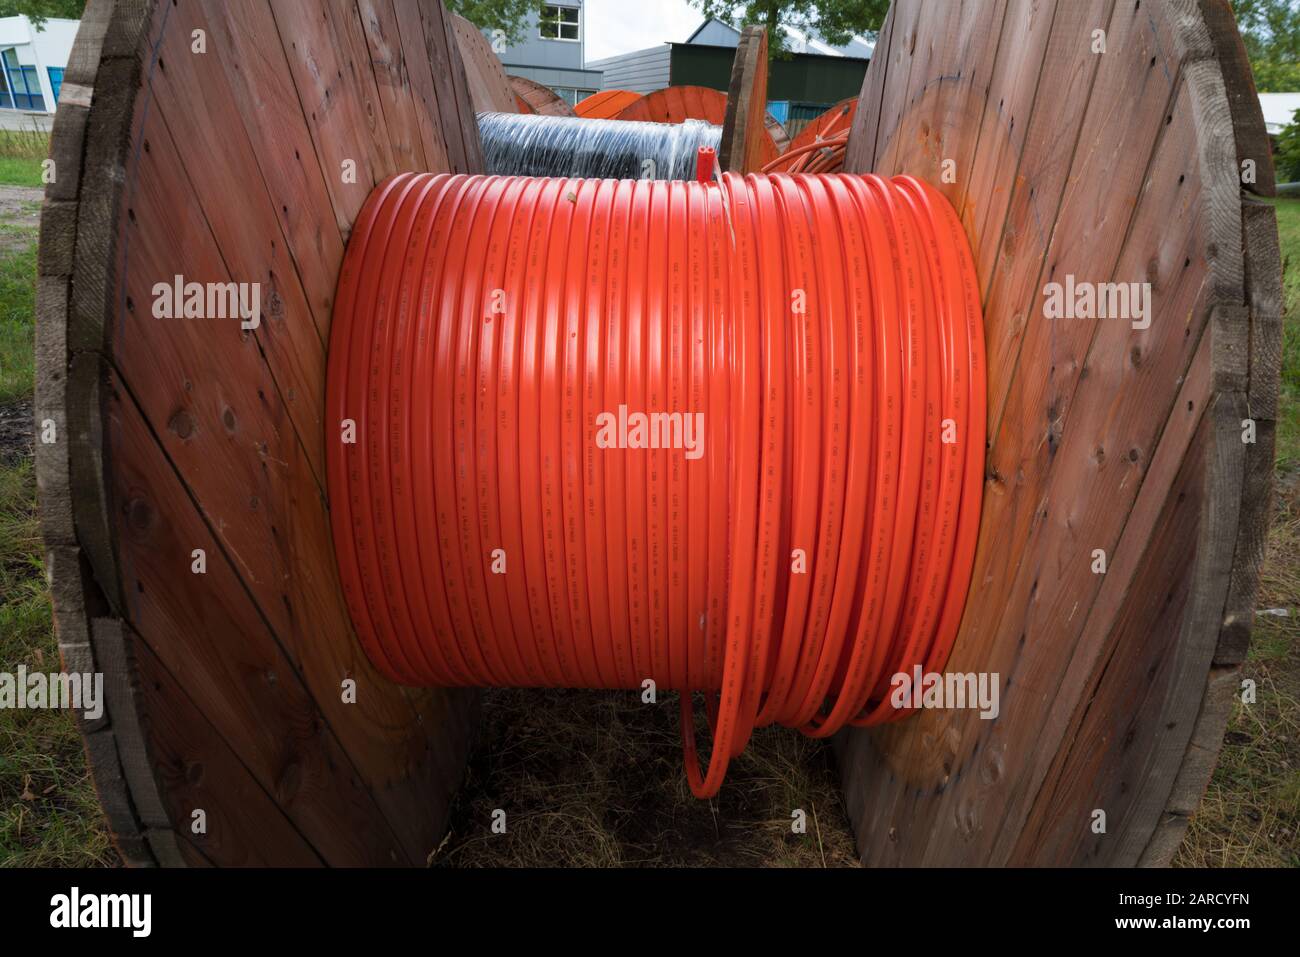 HENGELO, NETHERLANDS - AUGUST 25, 2018: closeup of a cable drum with orange fiber glass cable on a construction site Stock Photo